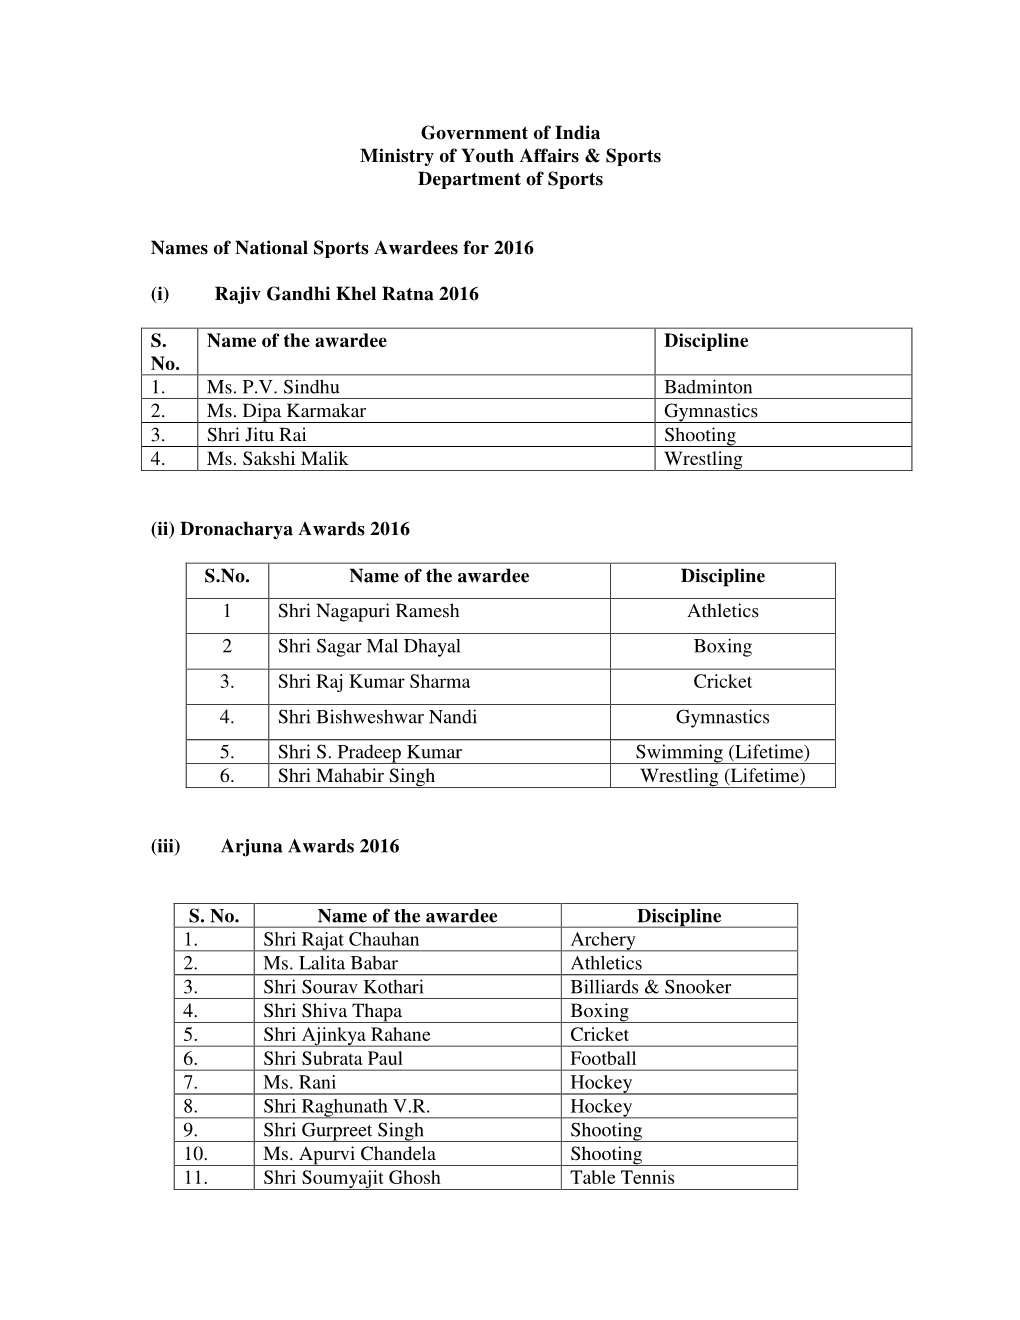 Government of India Ministry of Youth Affairs & Sports Department of Sports Names of National Sports Awardees for 2016